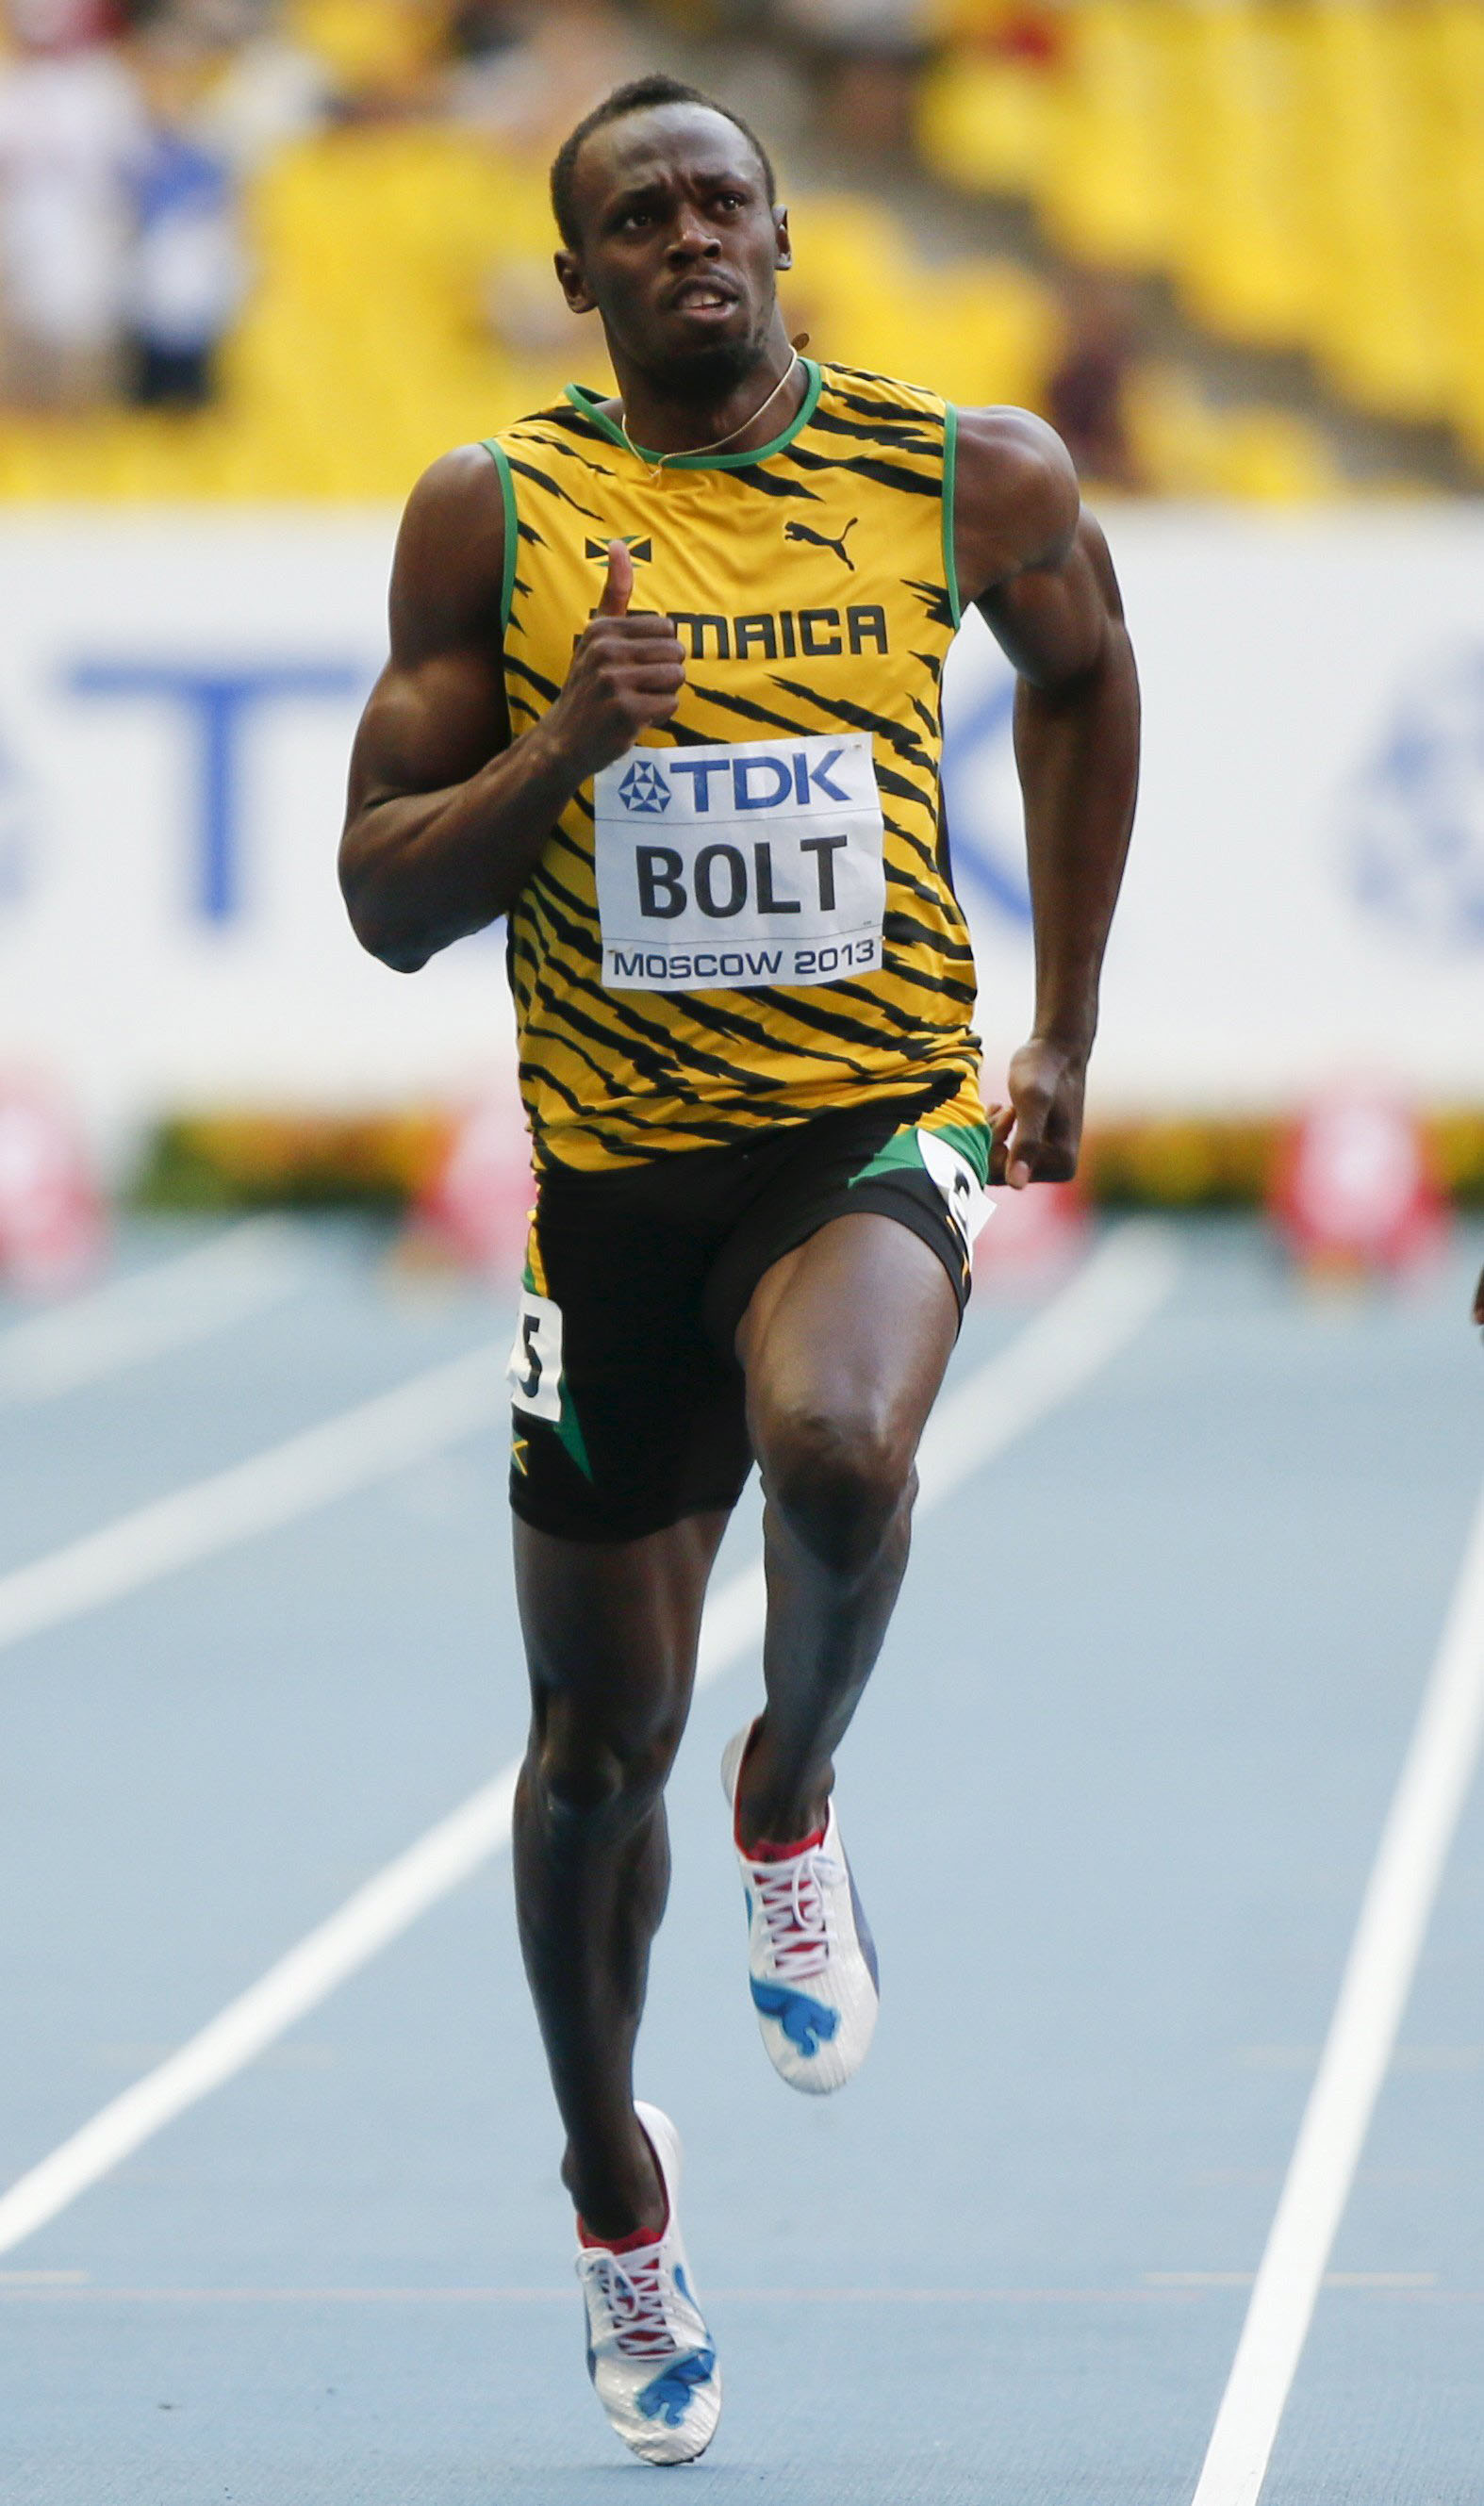 Usain Bolt of Jamaica competes in the men's 100 metres semi-final heat event during the IAAF World Athletics Championships at the Luzhniki stadium in Moscow, Russia, in this August 11, 2013 file photo. Bolt's coach is convinced the Jamaican phenomenon can once again put aside injury concerns and mediocre form to maintain his grip on the major sprint titles at this month's world championship. REUTERS/Lucy Nicholson/Files